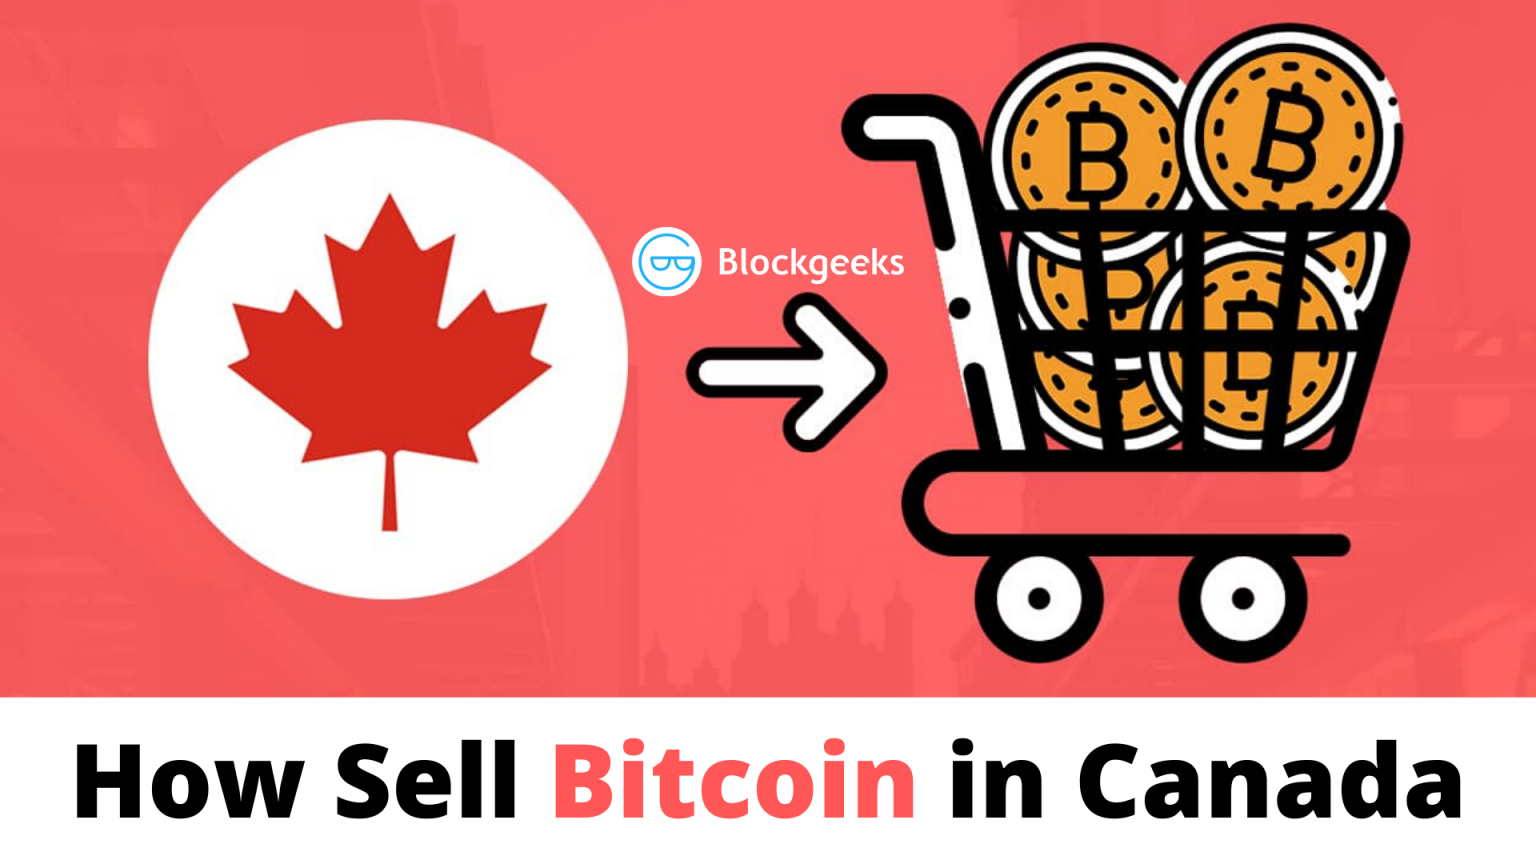 how do you buy bitcoin in canada